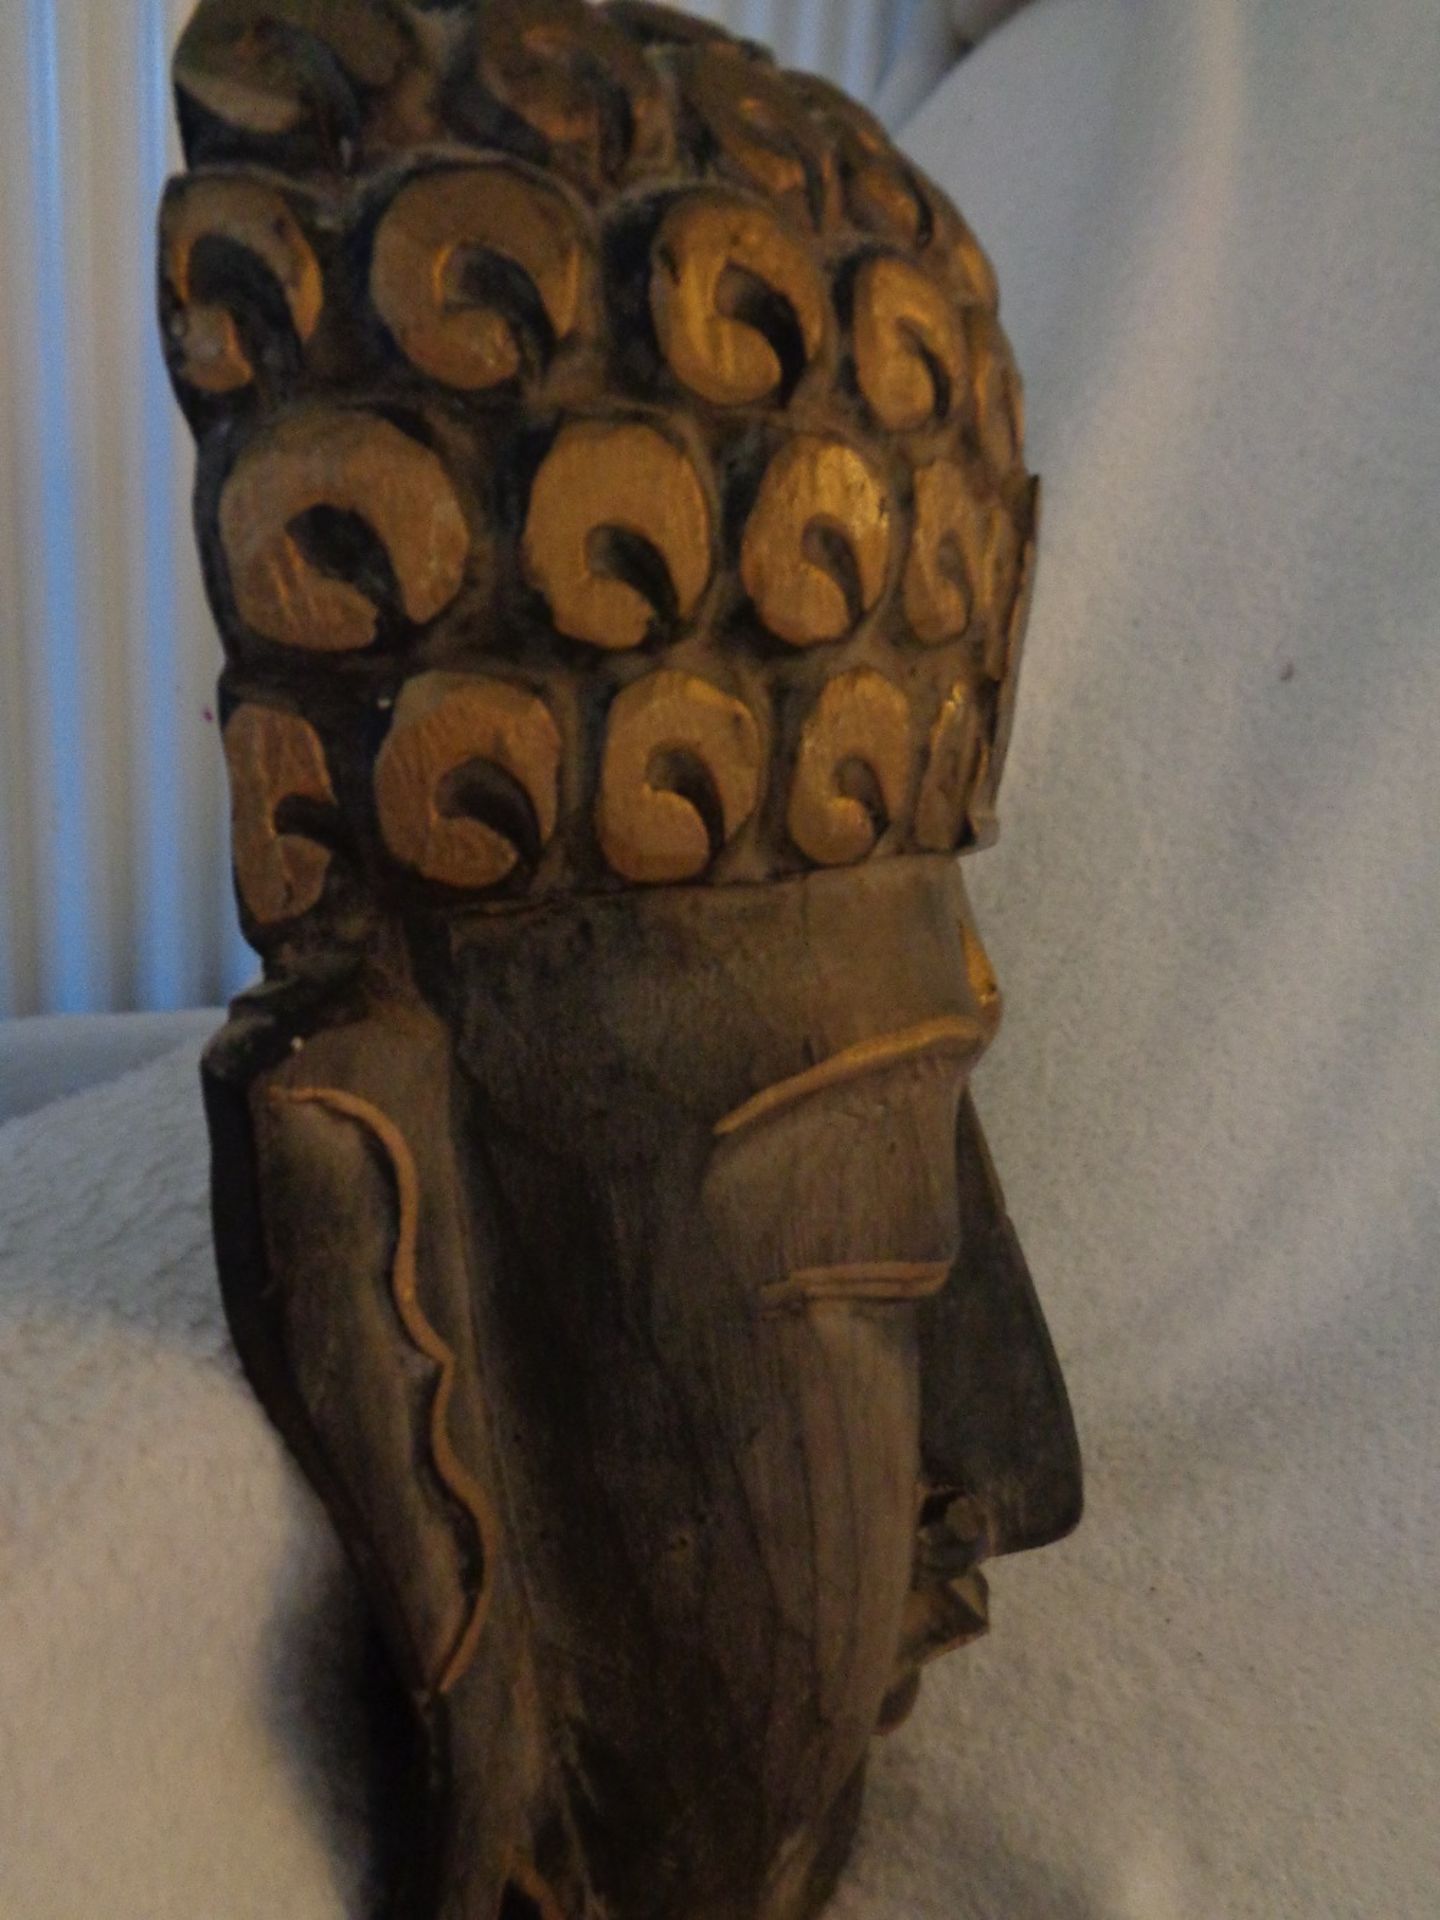 INDIAN TRIBAL ART BUDDHA 12"" X 9"" HAND CARVED - Image 2 of 2